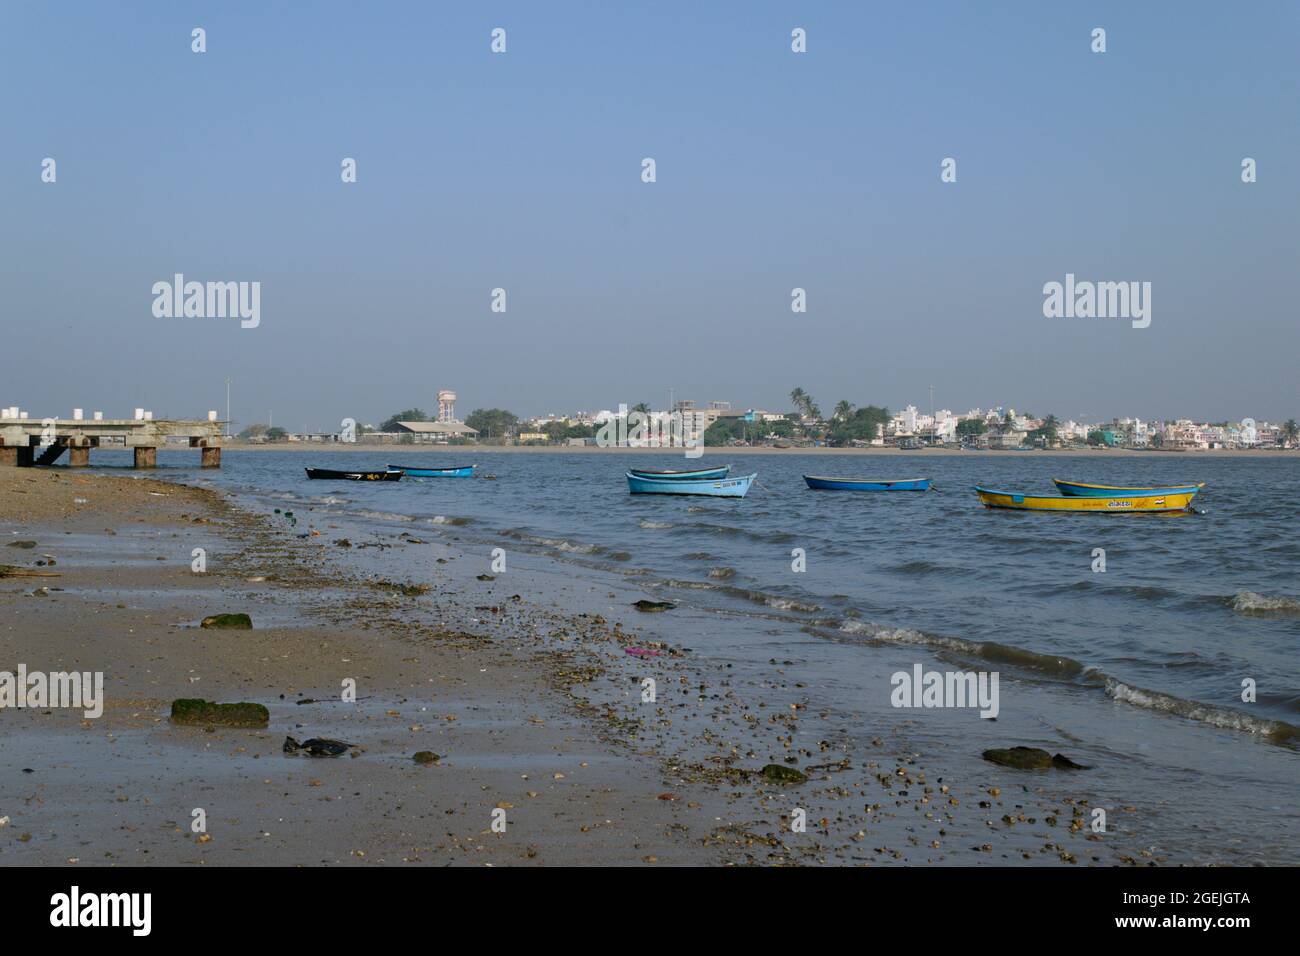 Many small colorful boats are anchored at a sandy beach in the port city of Diu India in the Arabian sea. Stock Photo